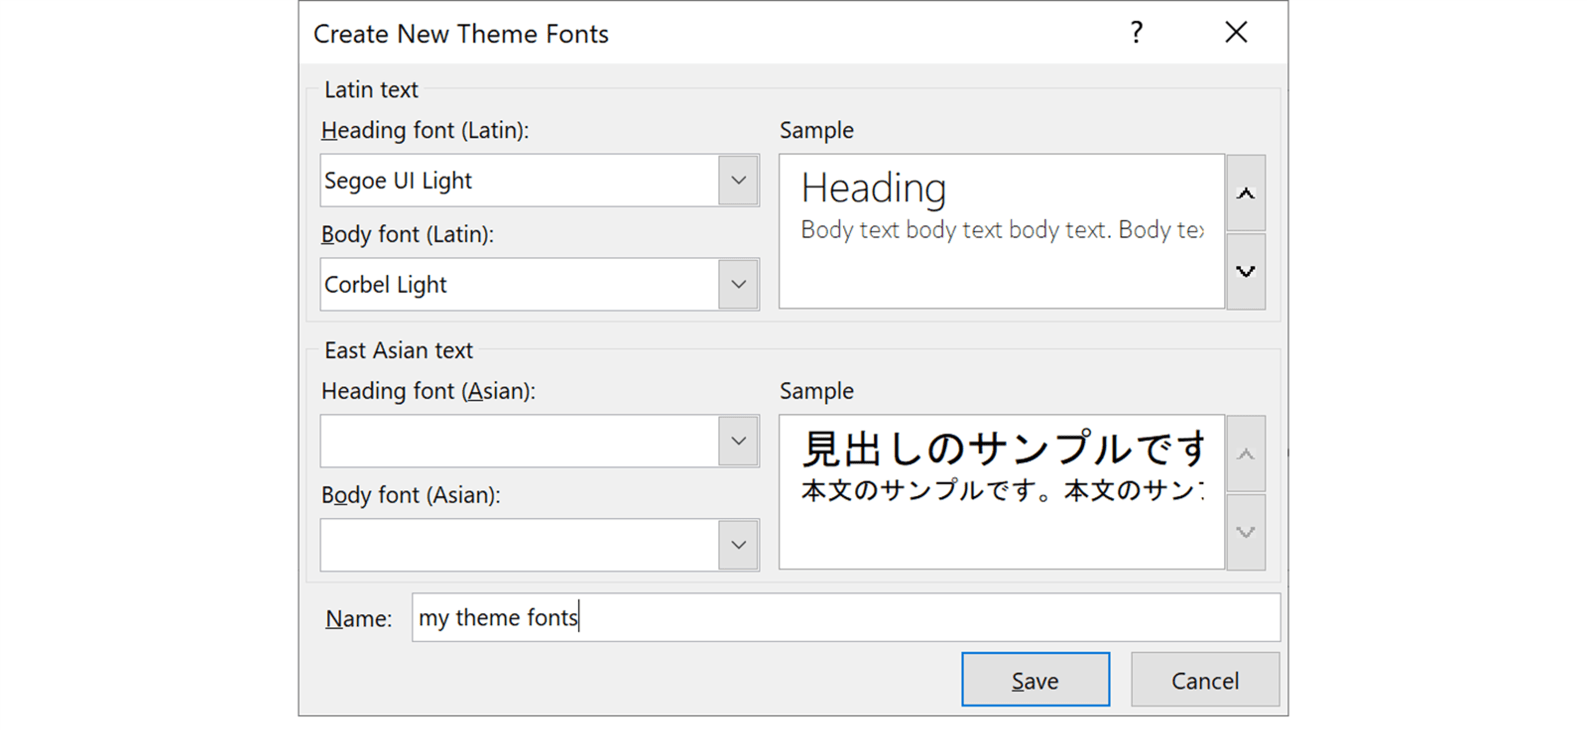 Screenshot of the Create New Theme Fonts pop up window in PowerPoint showing two languages 